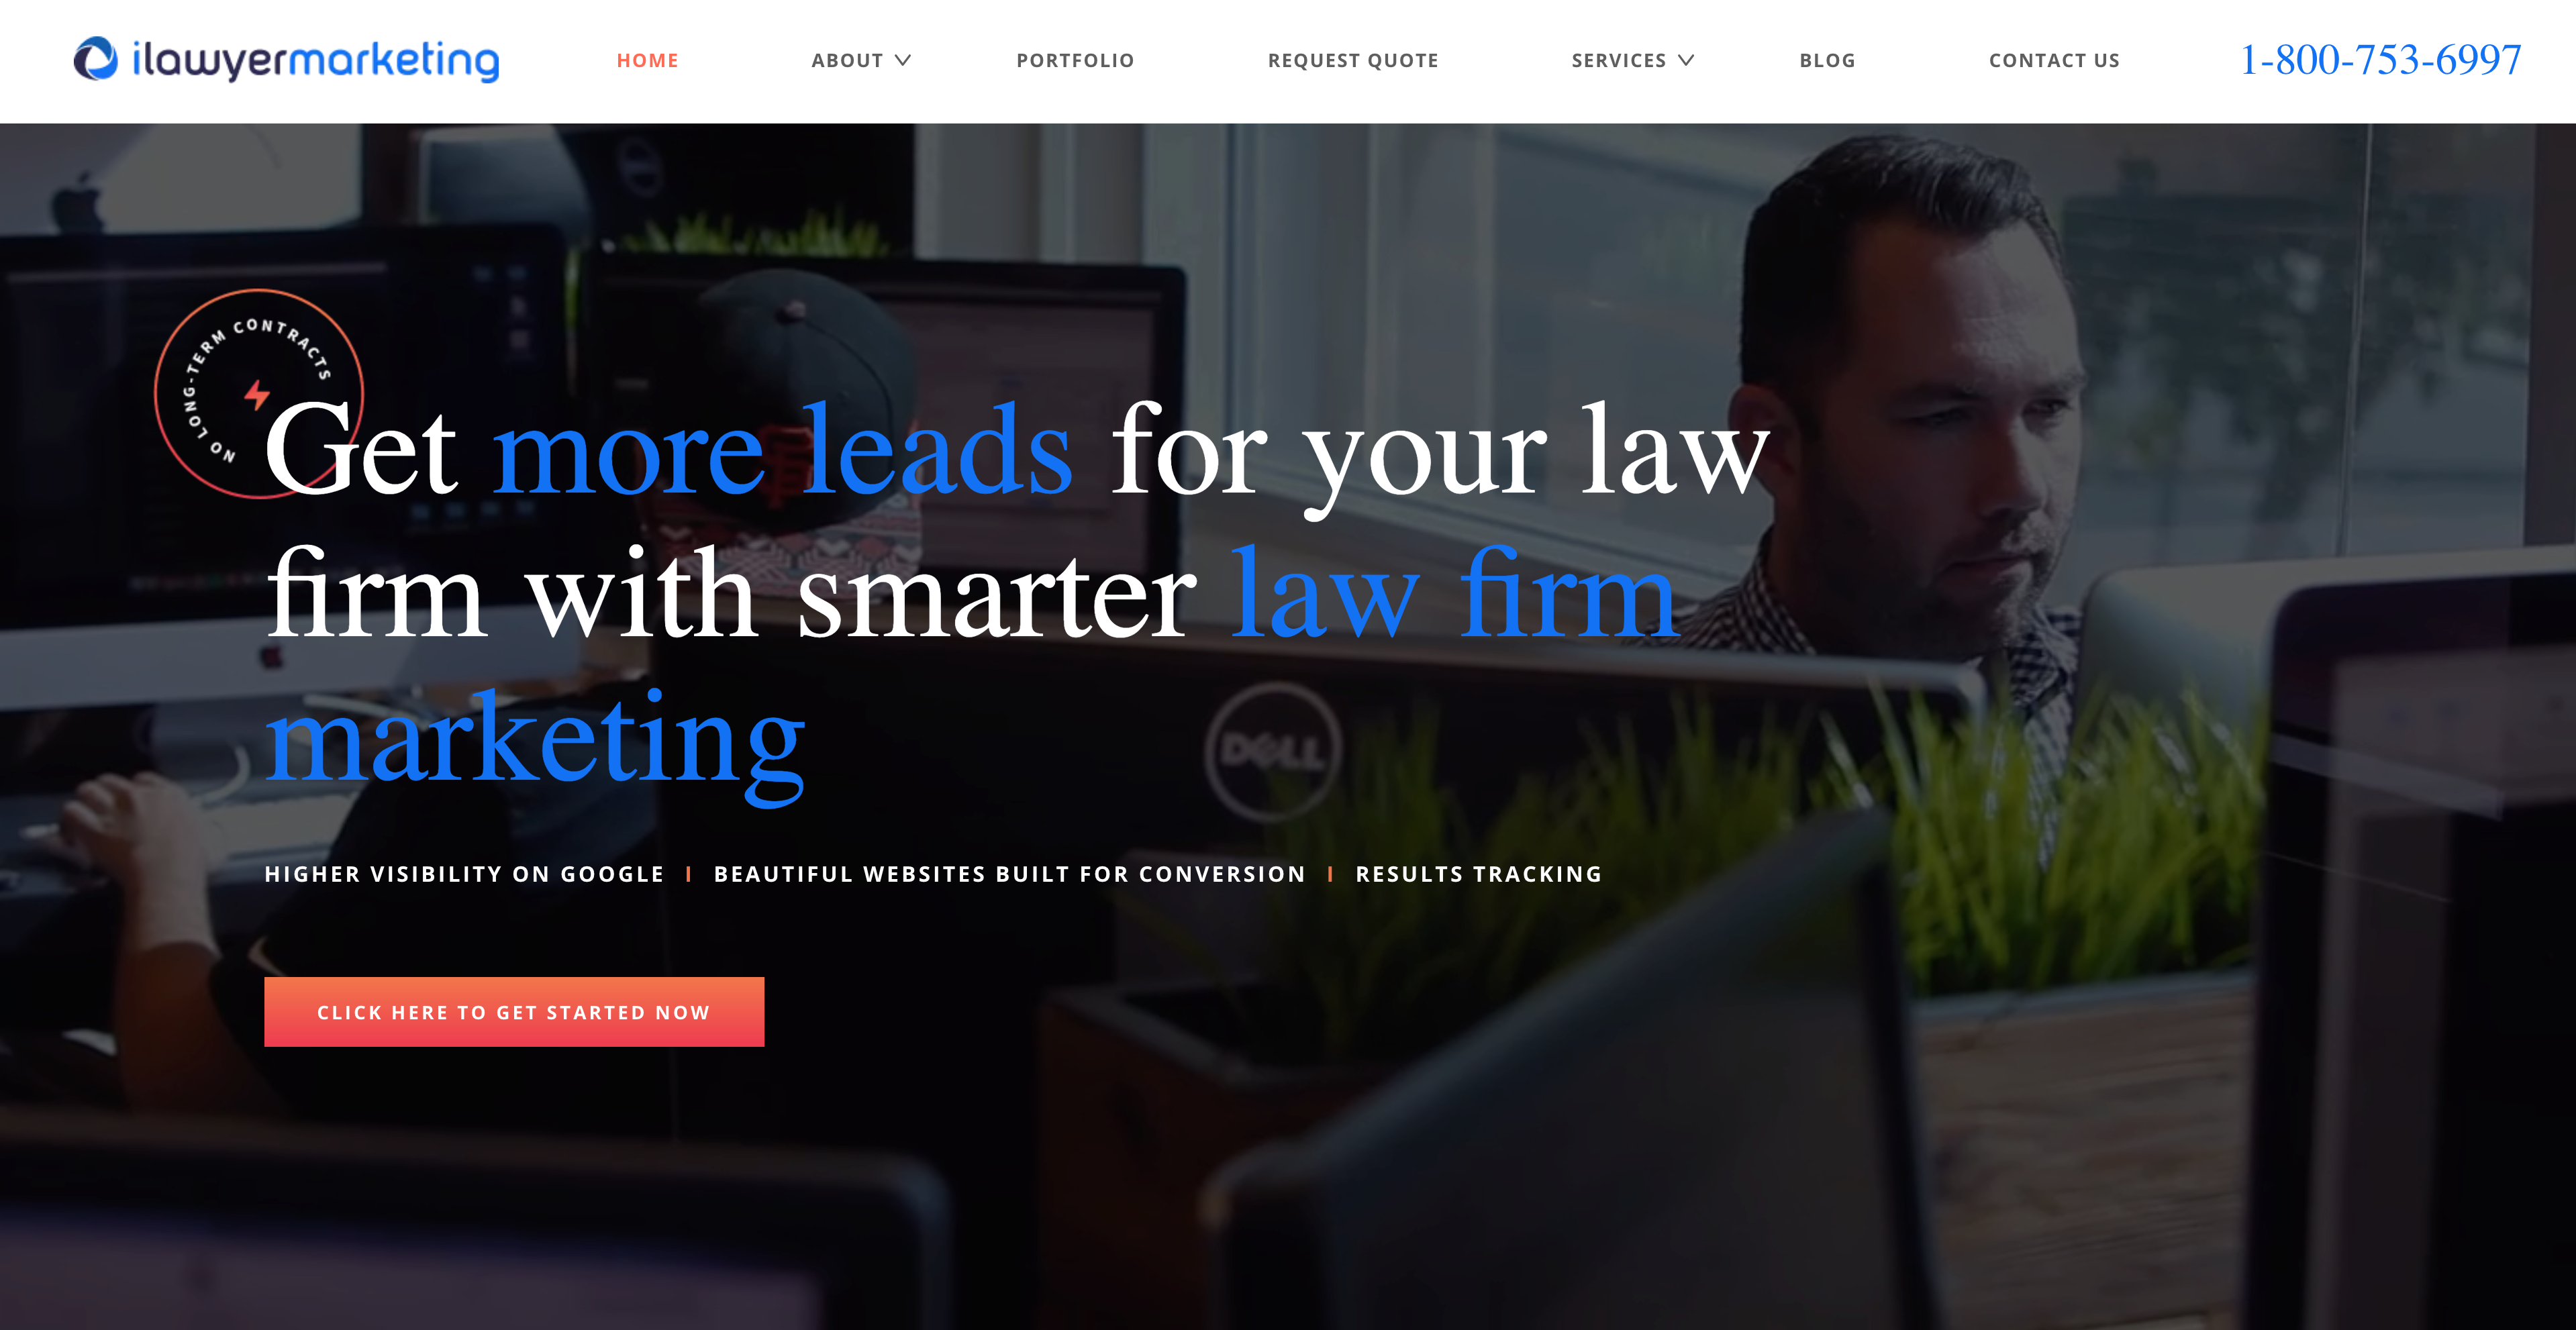 iLawyerMarketing's home page for law firm marketing and lead generation.